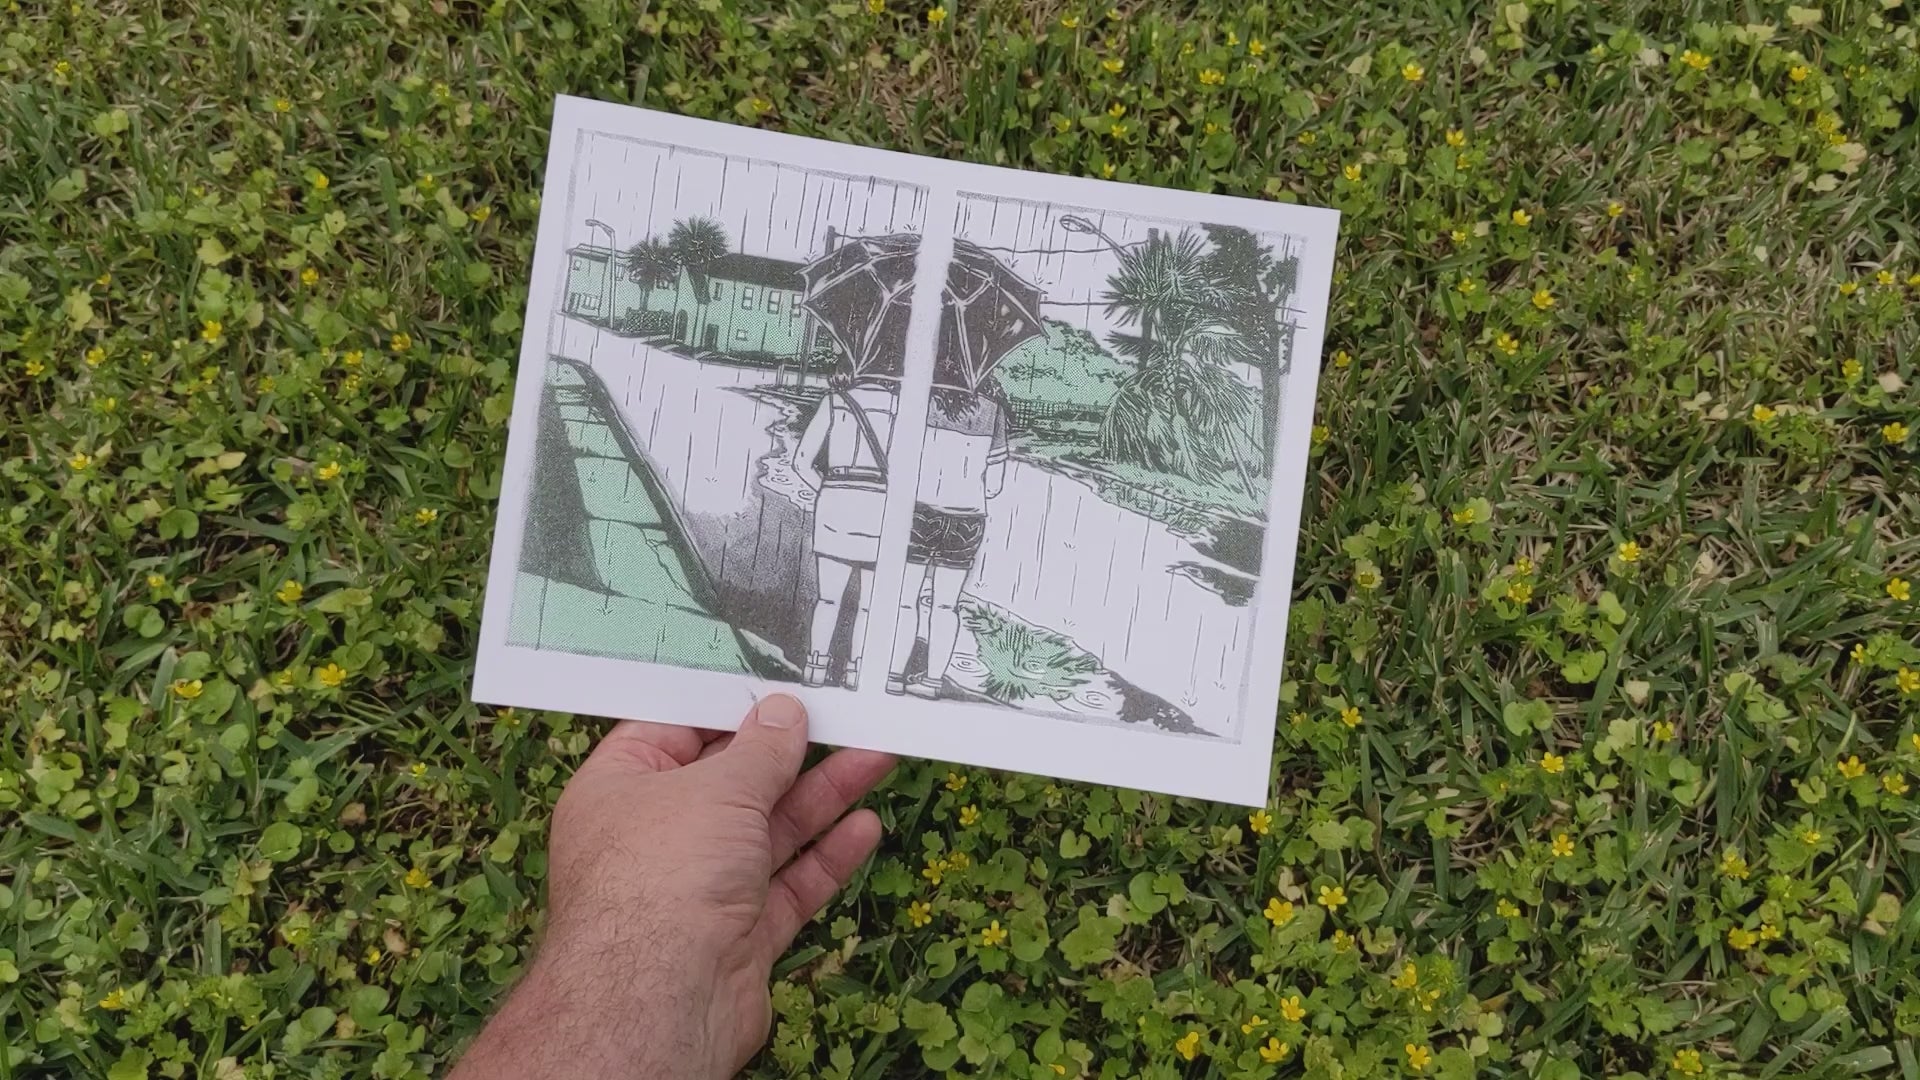 Video showing front and back of risograph art print 'Umbrella Share'